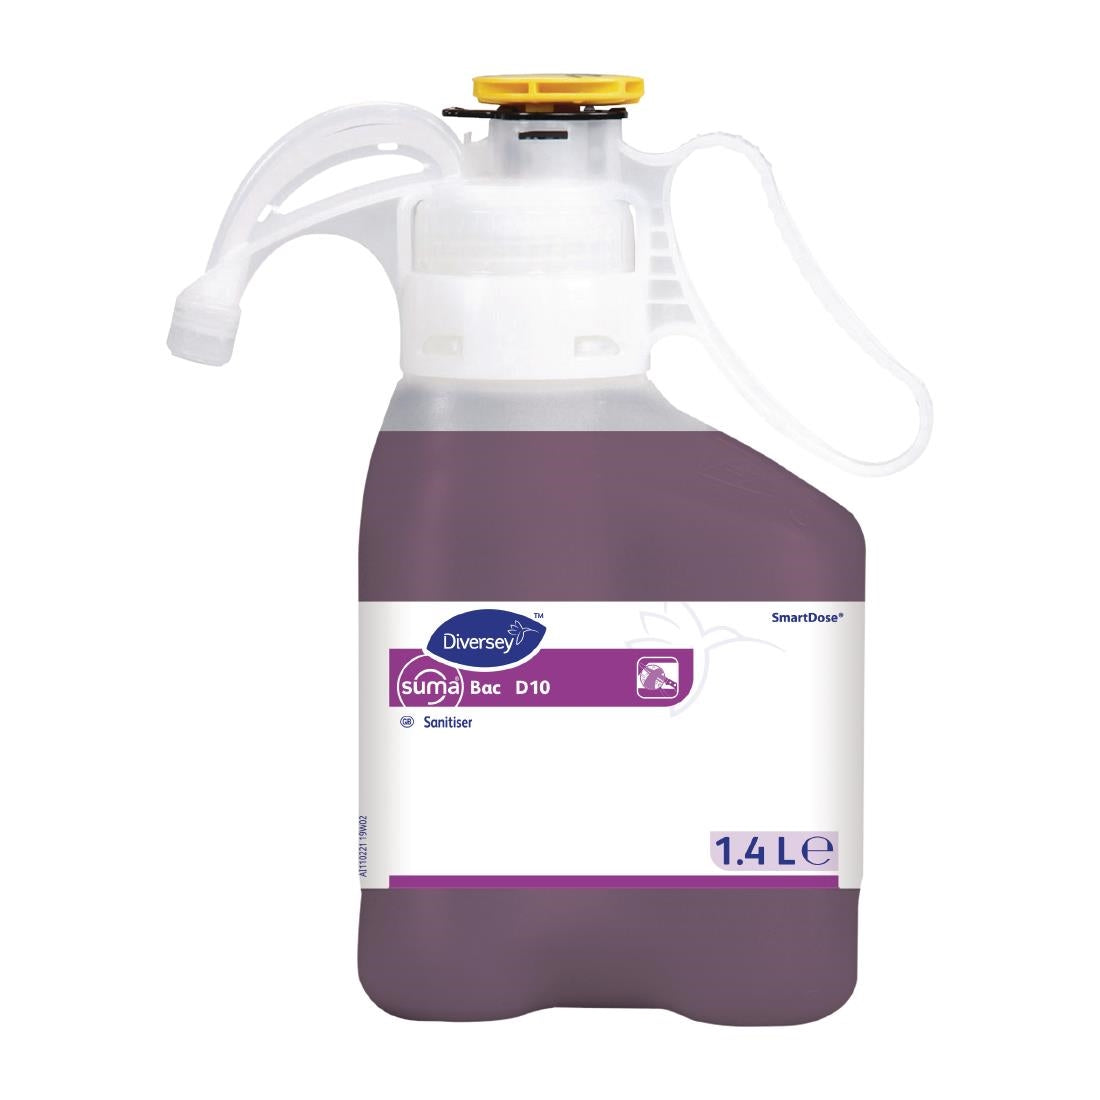 CX807 Suma SmartDose Bac D10 Cleaner and Sanitiser Super Concentrate 1.4Ltr JD Catering Equipment Solutions Ltd